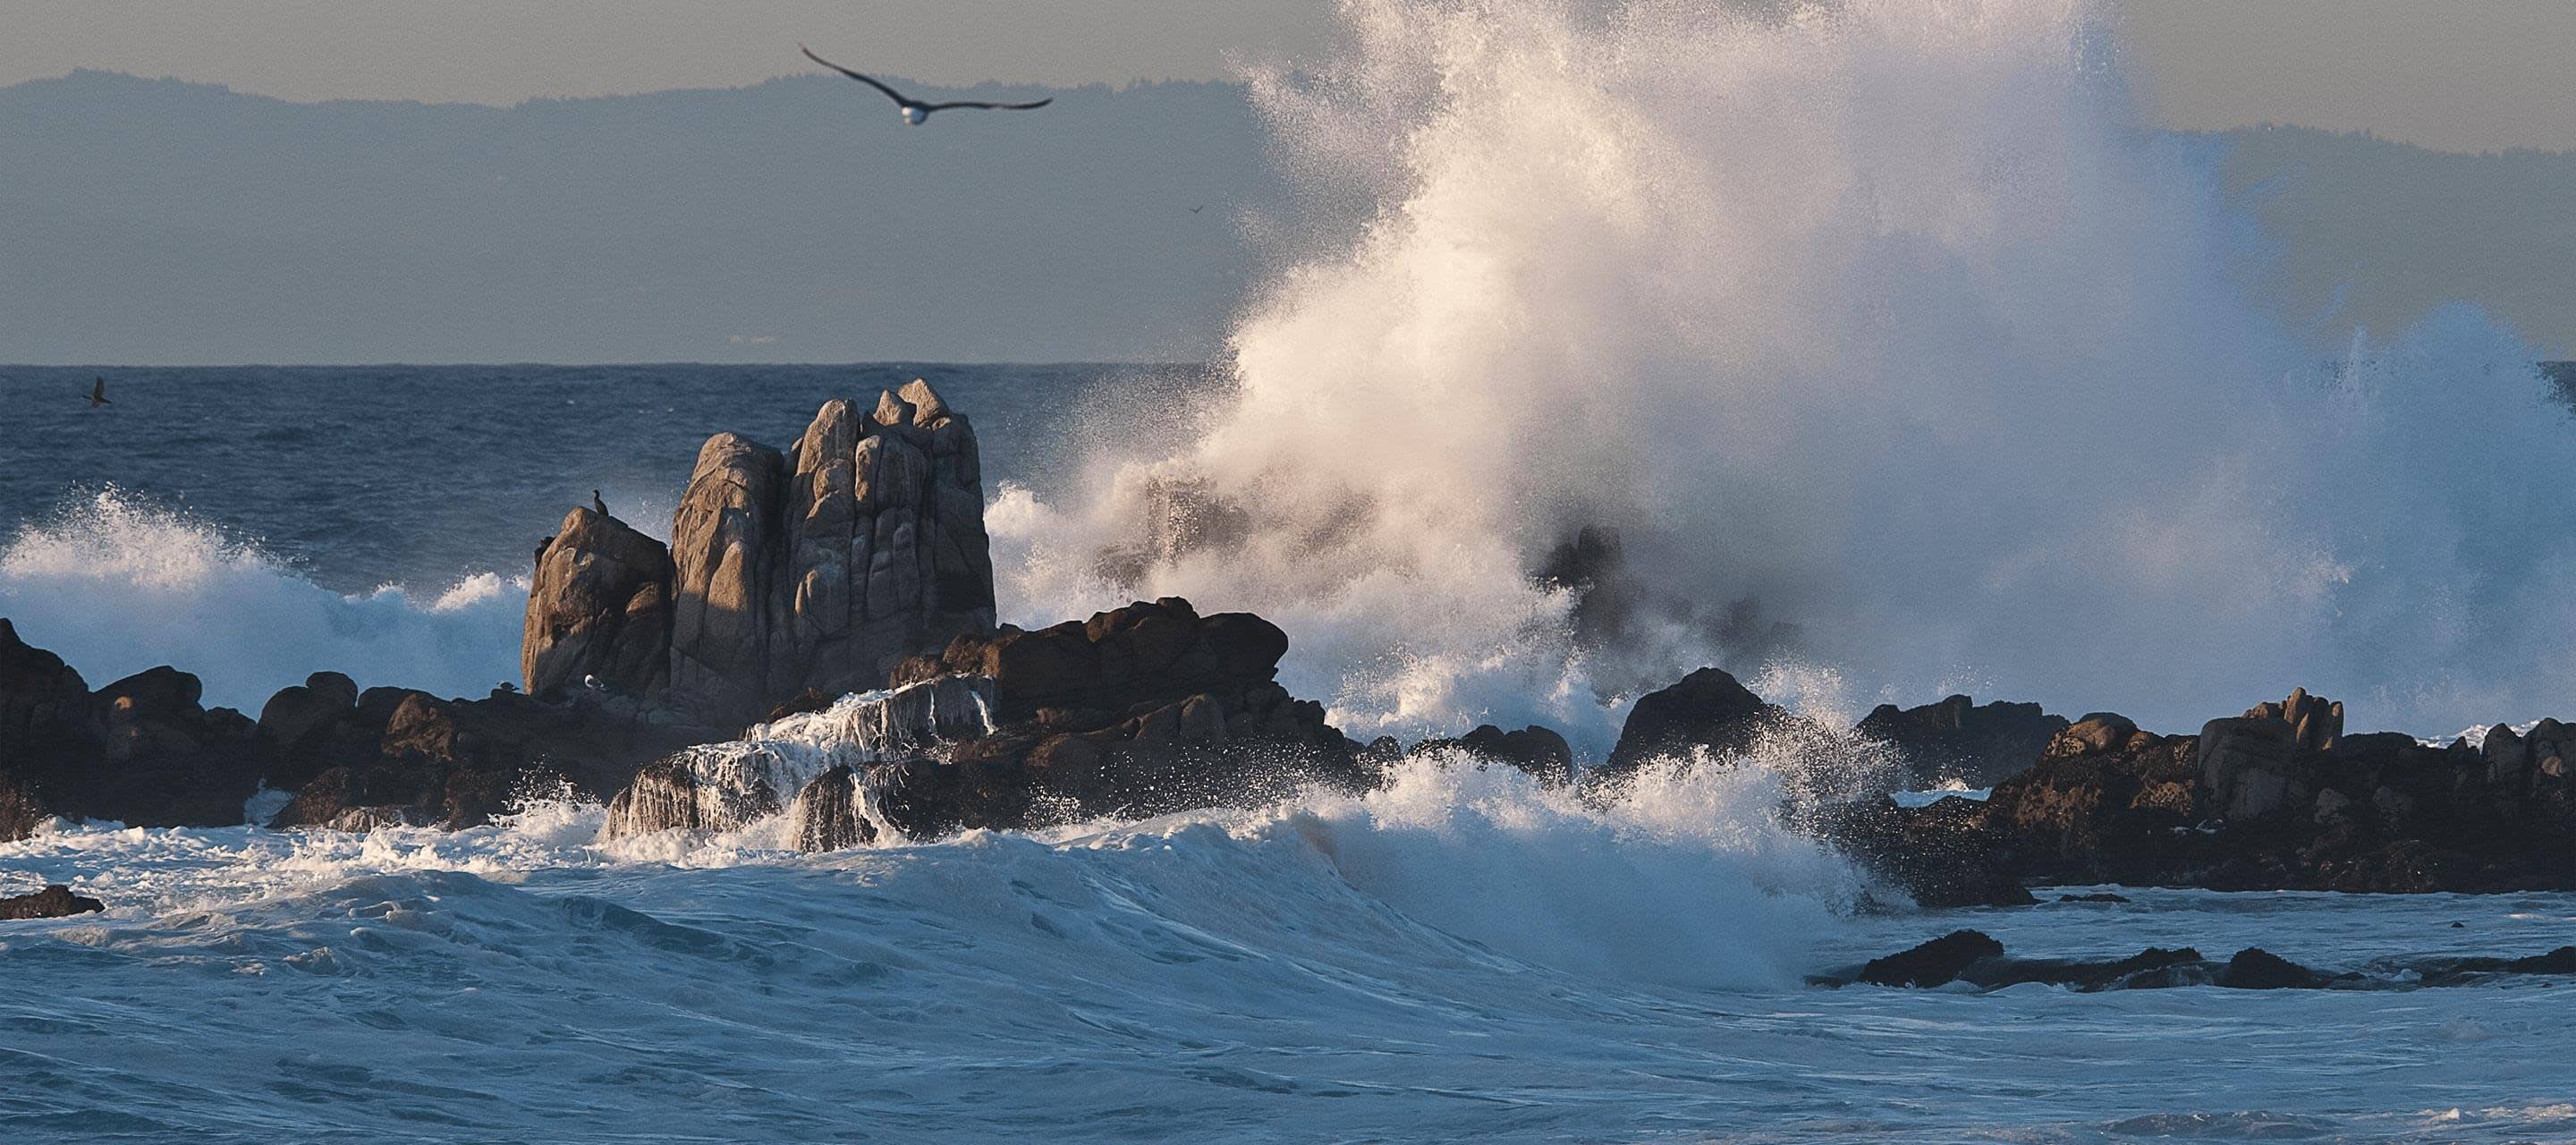 waves crashing against rocks and a bird flying away